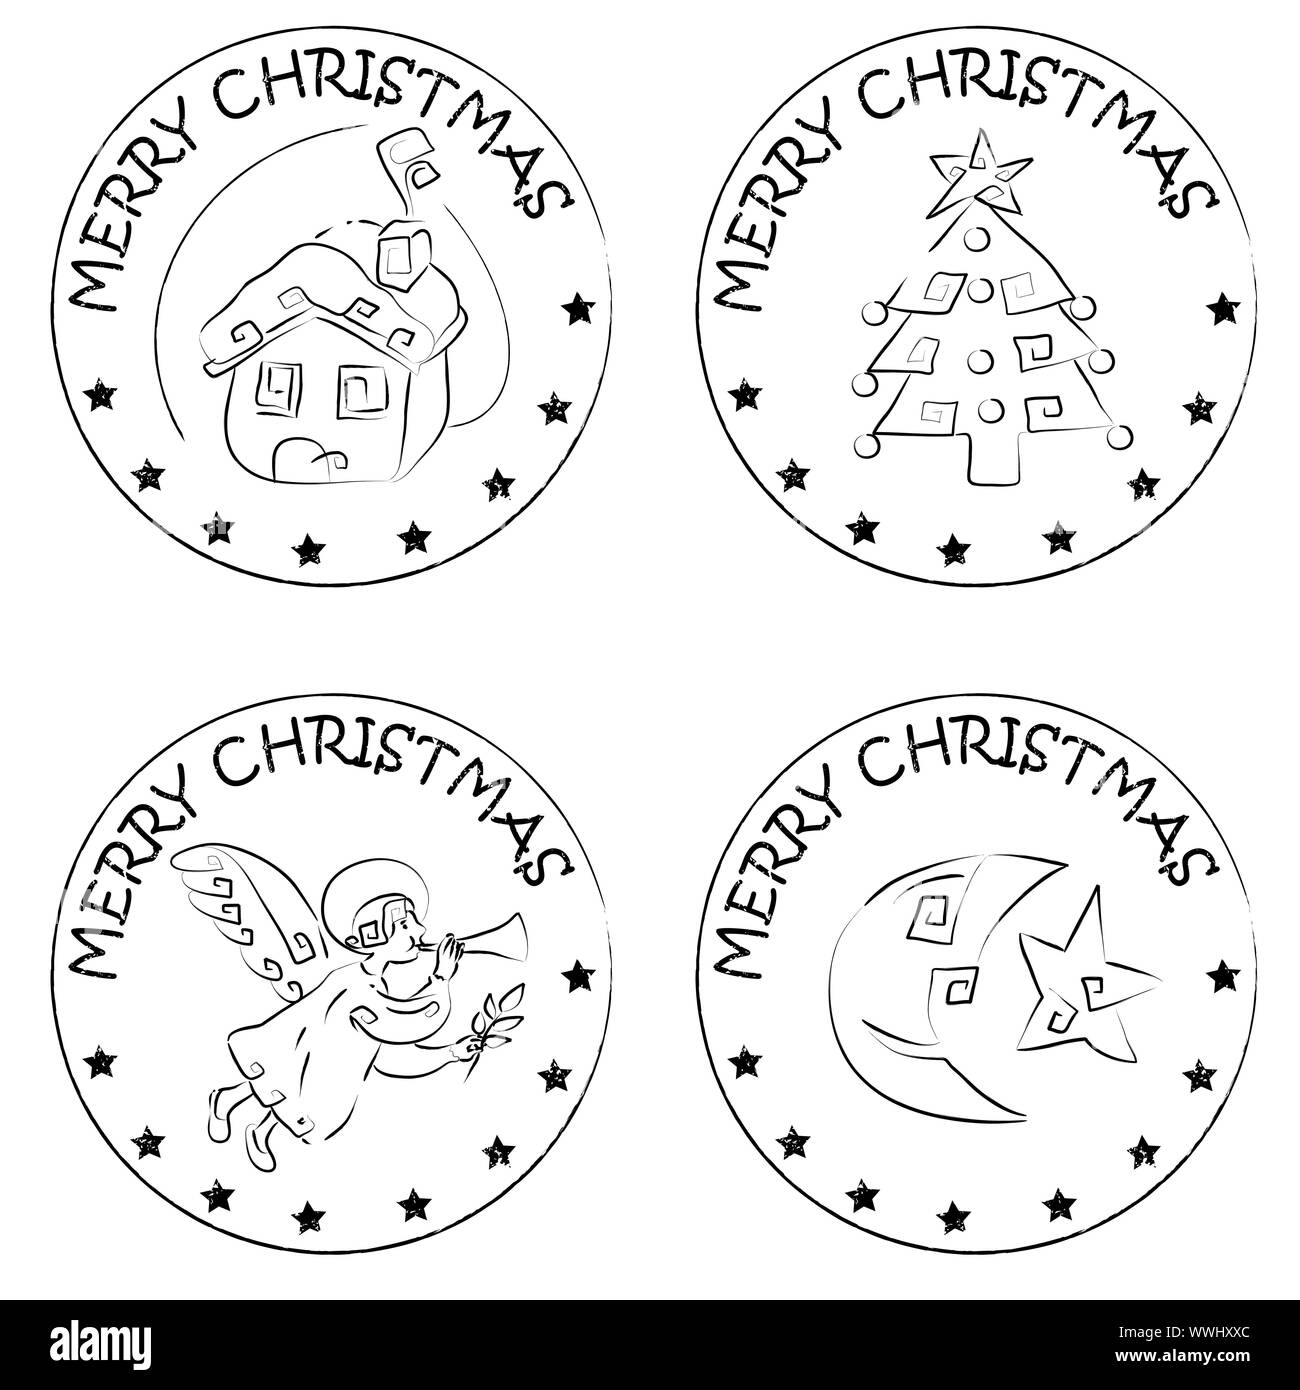 4 christmas coin stamps isolated on white with stars and merry christmas text, snow house, xmas tree, angel, moon and comet Stock Photo